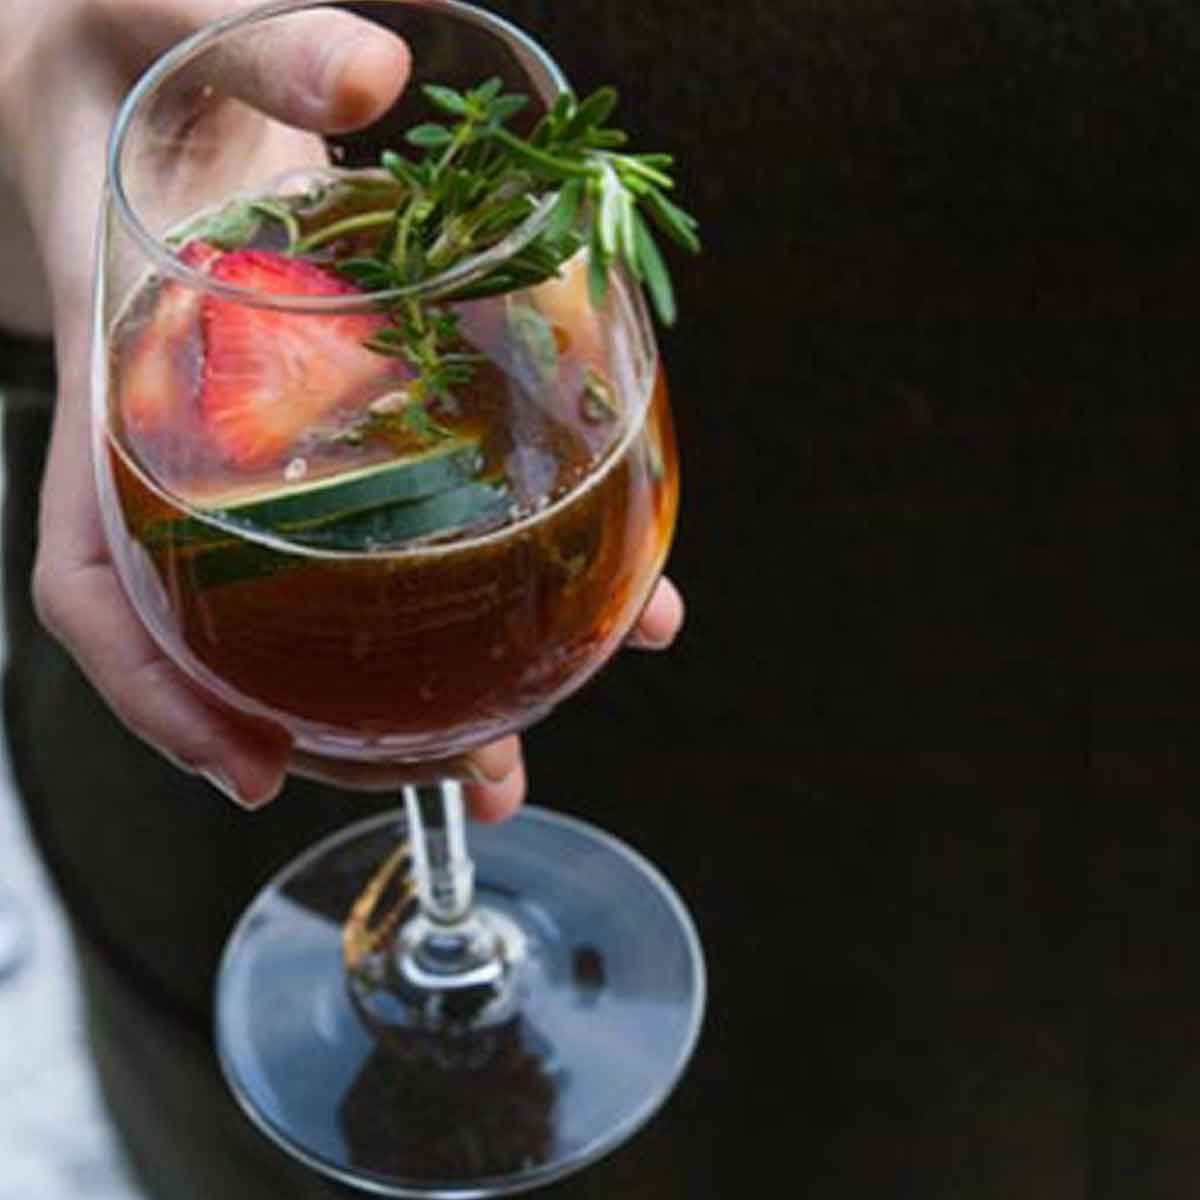 A hand holding a Pimm's Cup cocktail in a wine glass, full of herbs, cucumber and fruits.